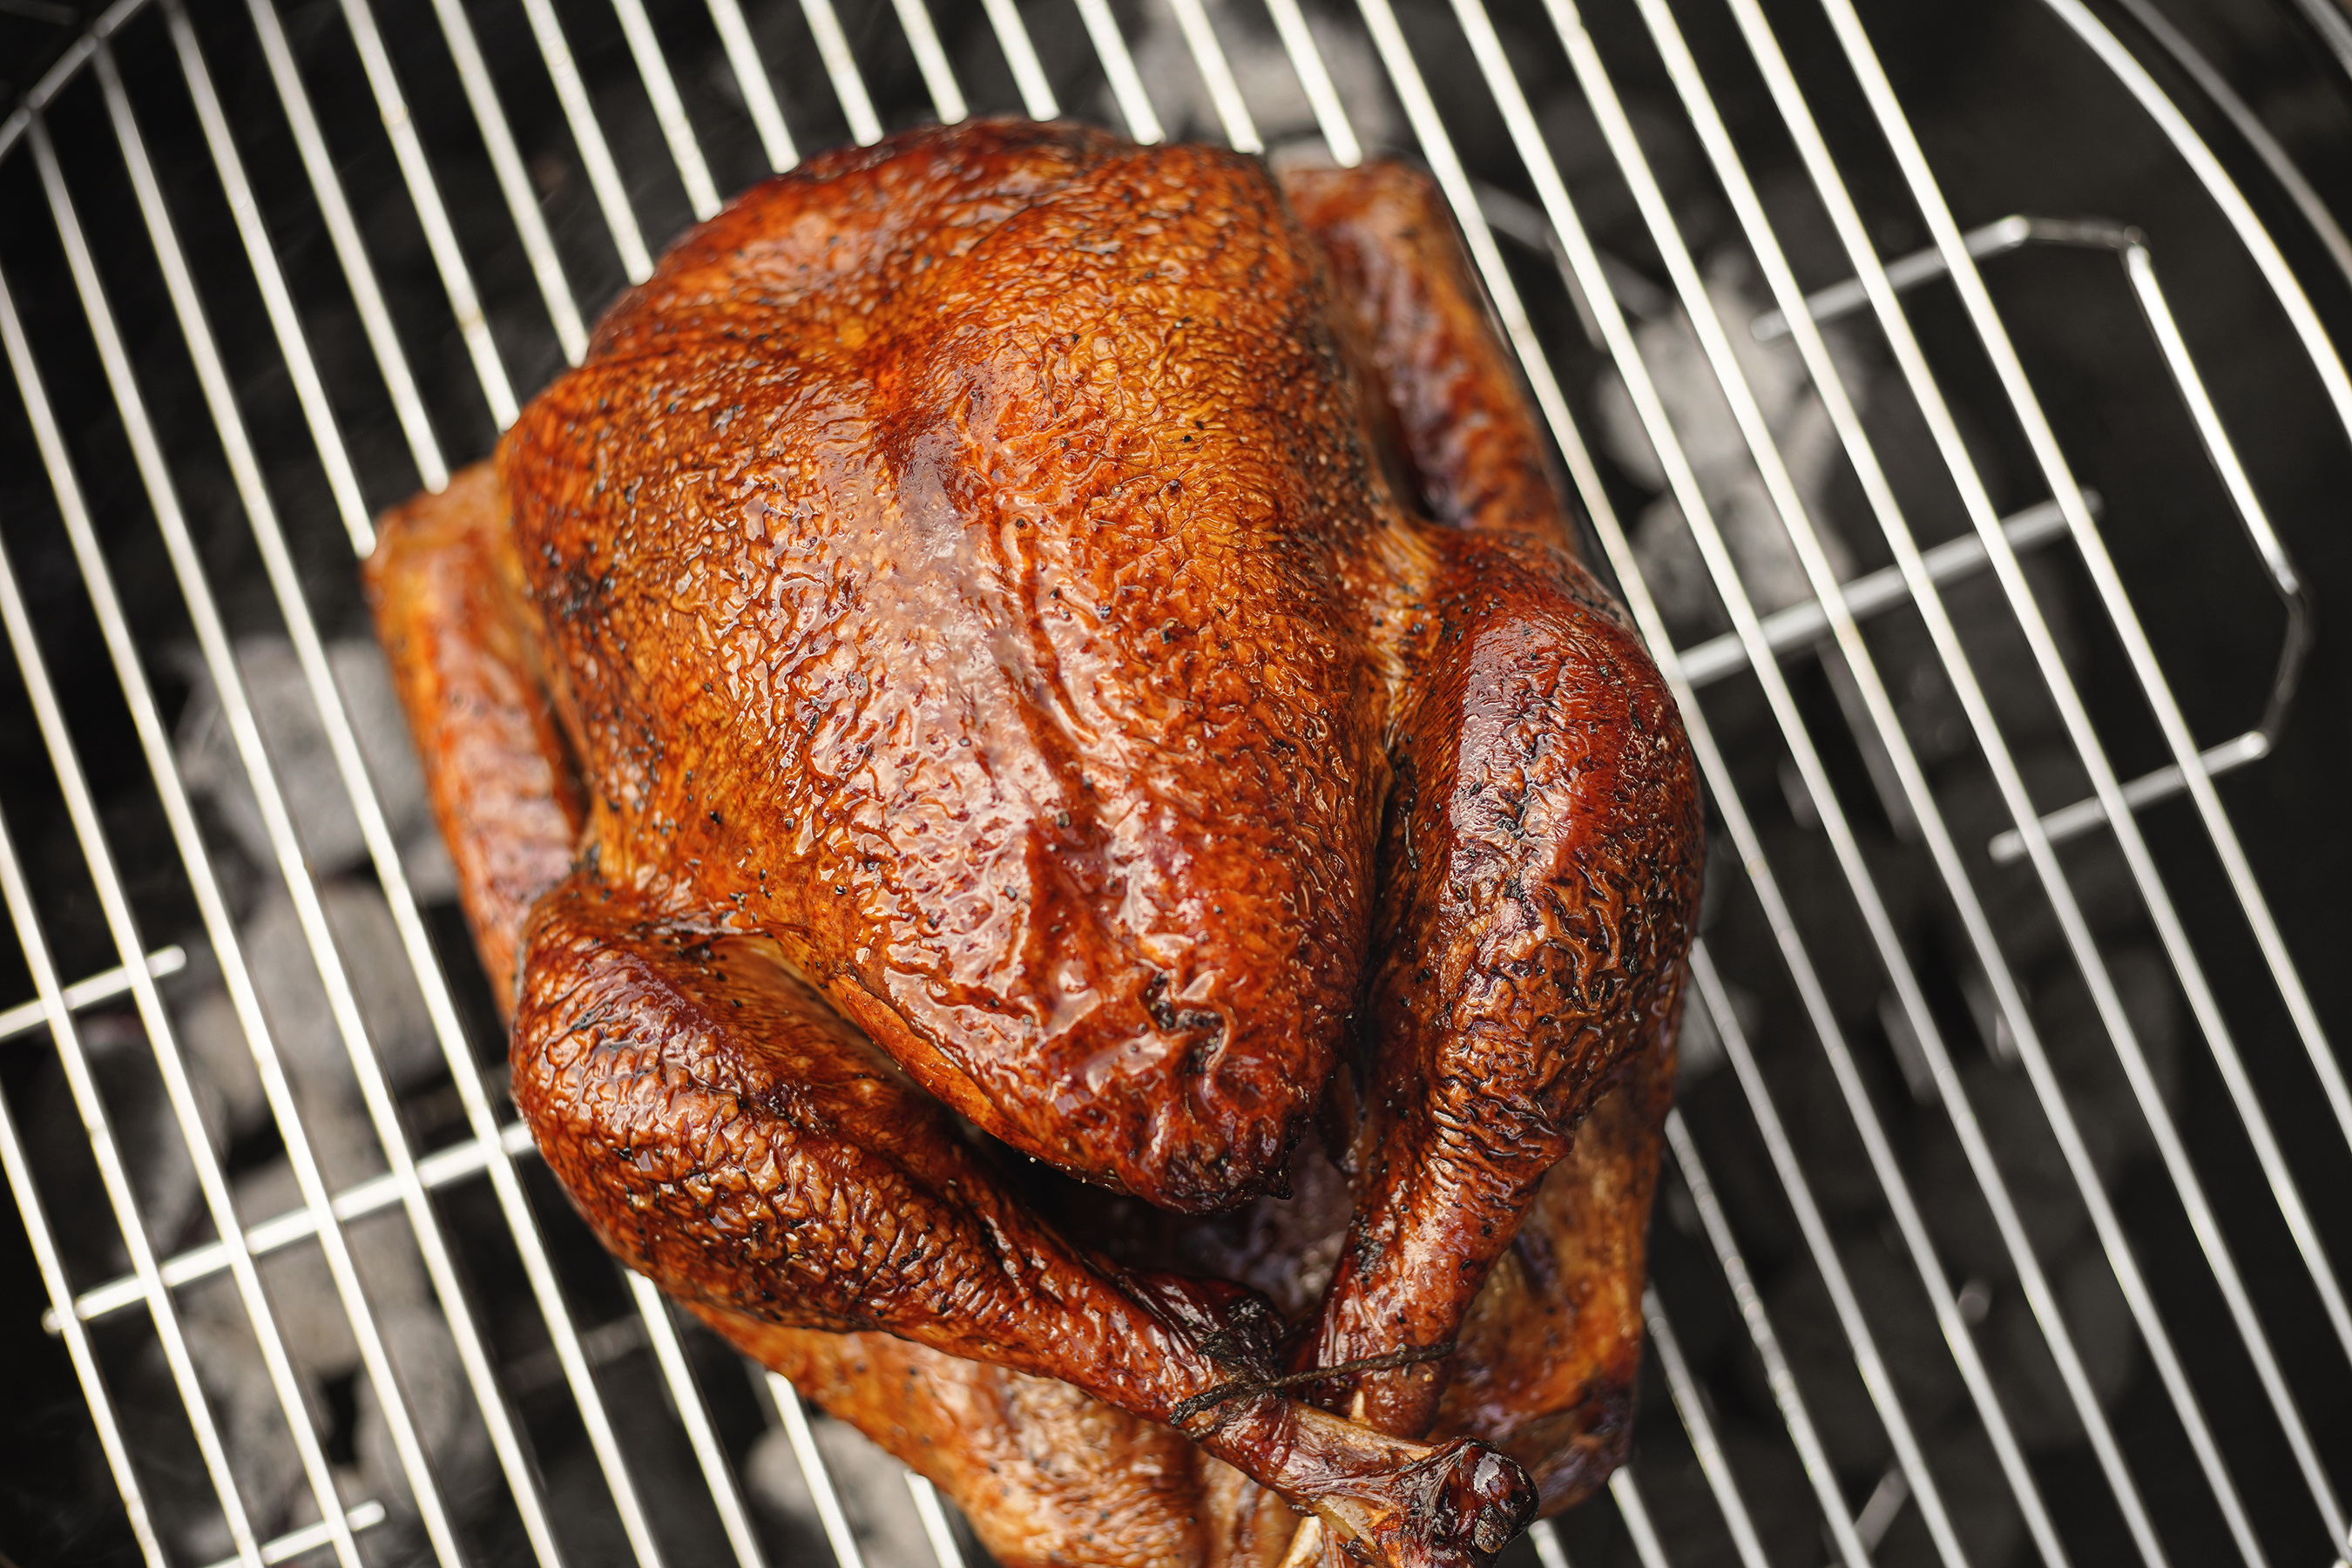 Think outside the oven! Take your turkey to the grill or smoker.